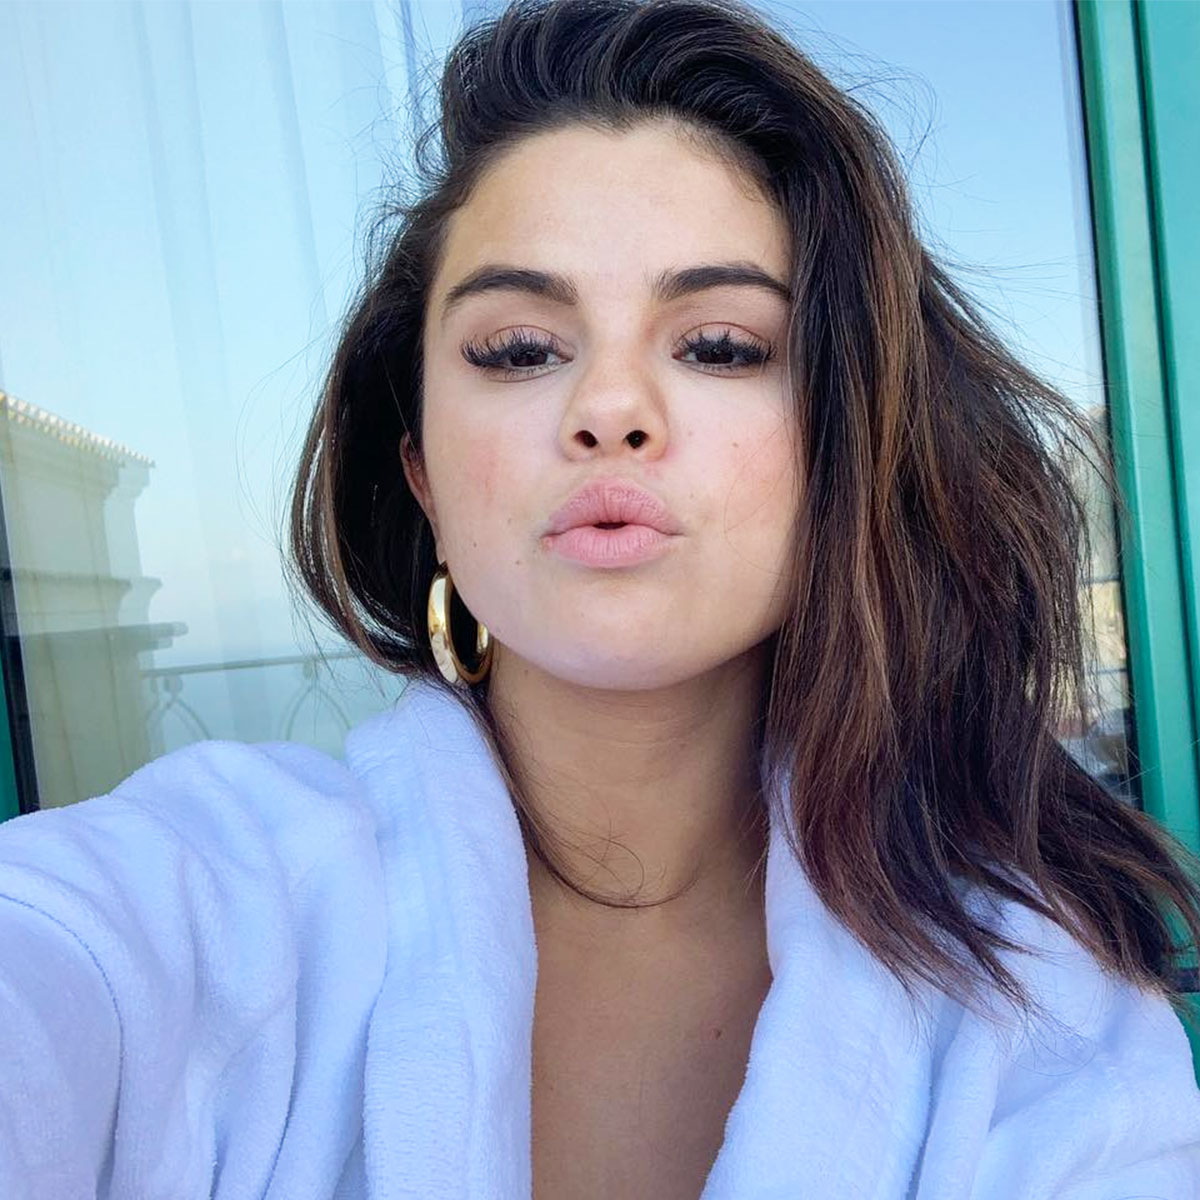 Selena Gomez Arrived In Cabo For New Year's With Brooklyn Beckham